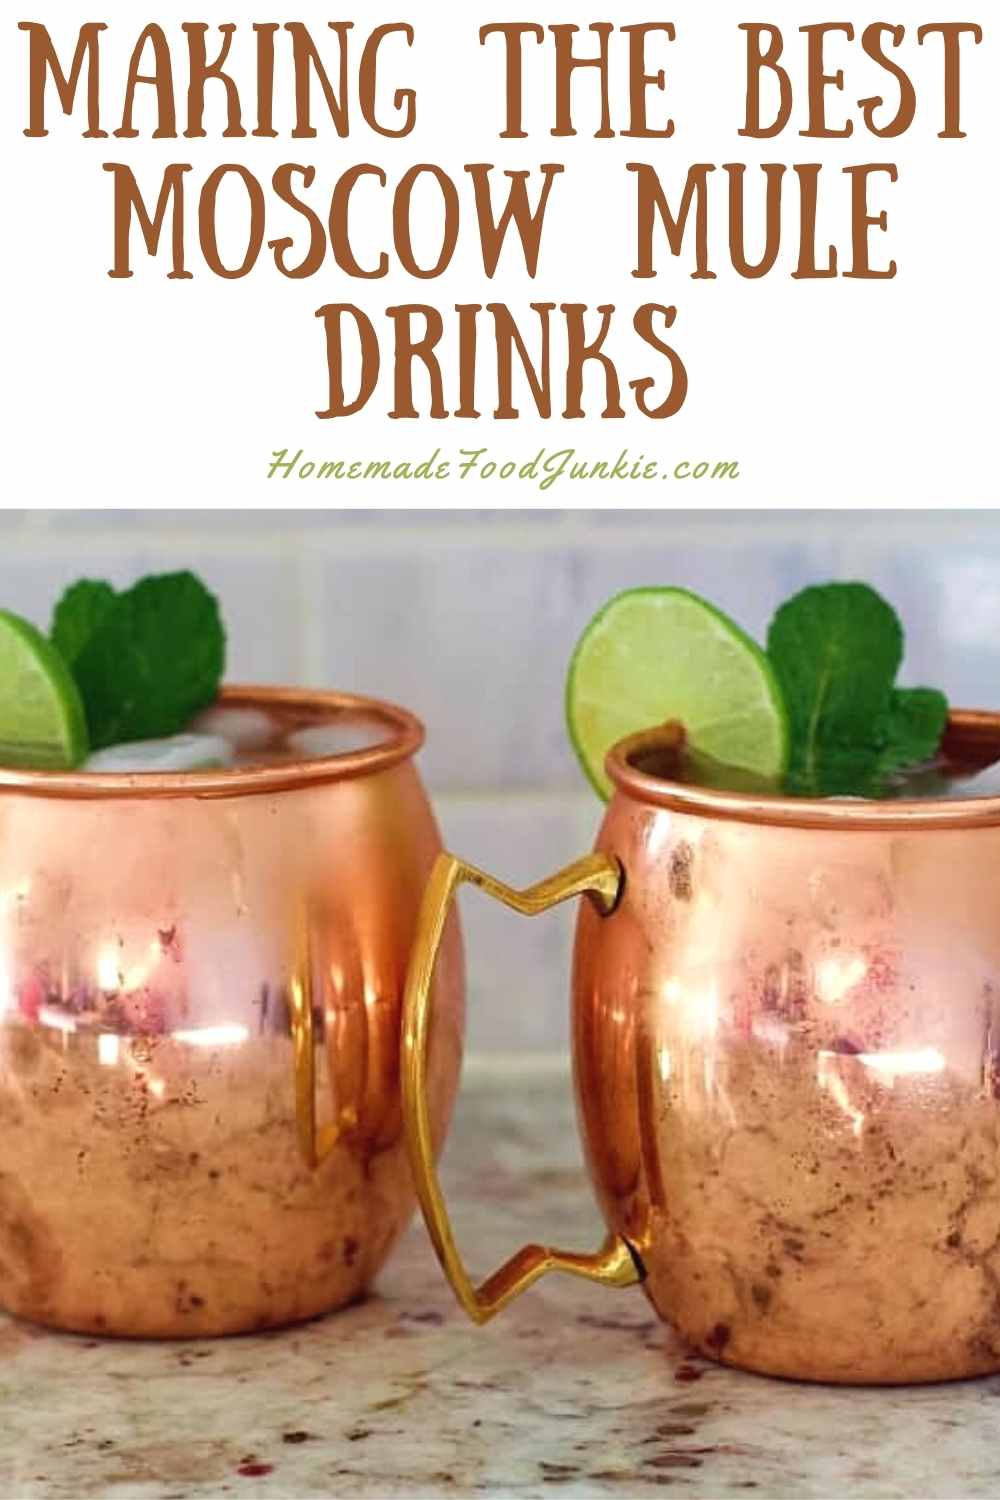 Making The Best Moscow Mule-Pin Image